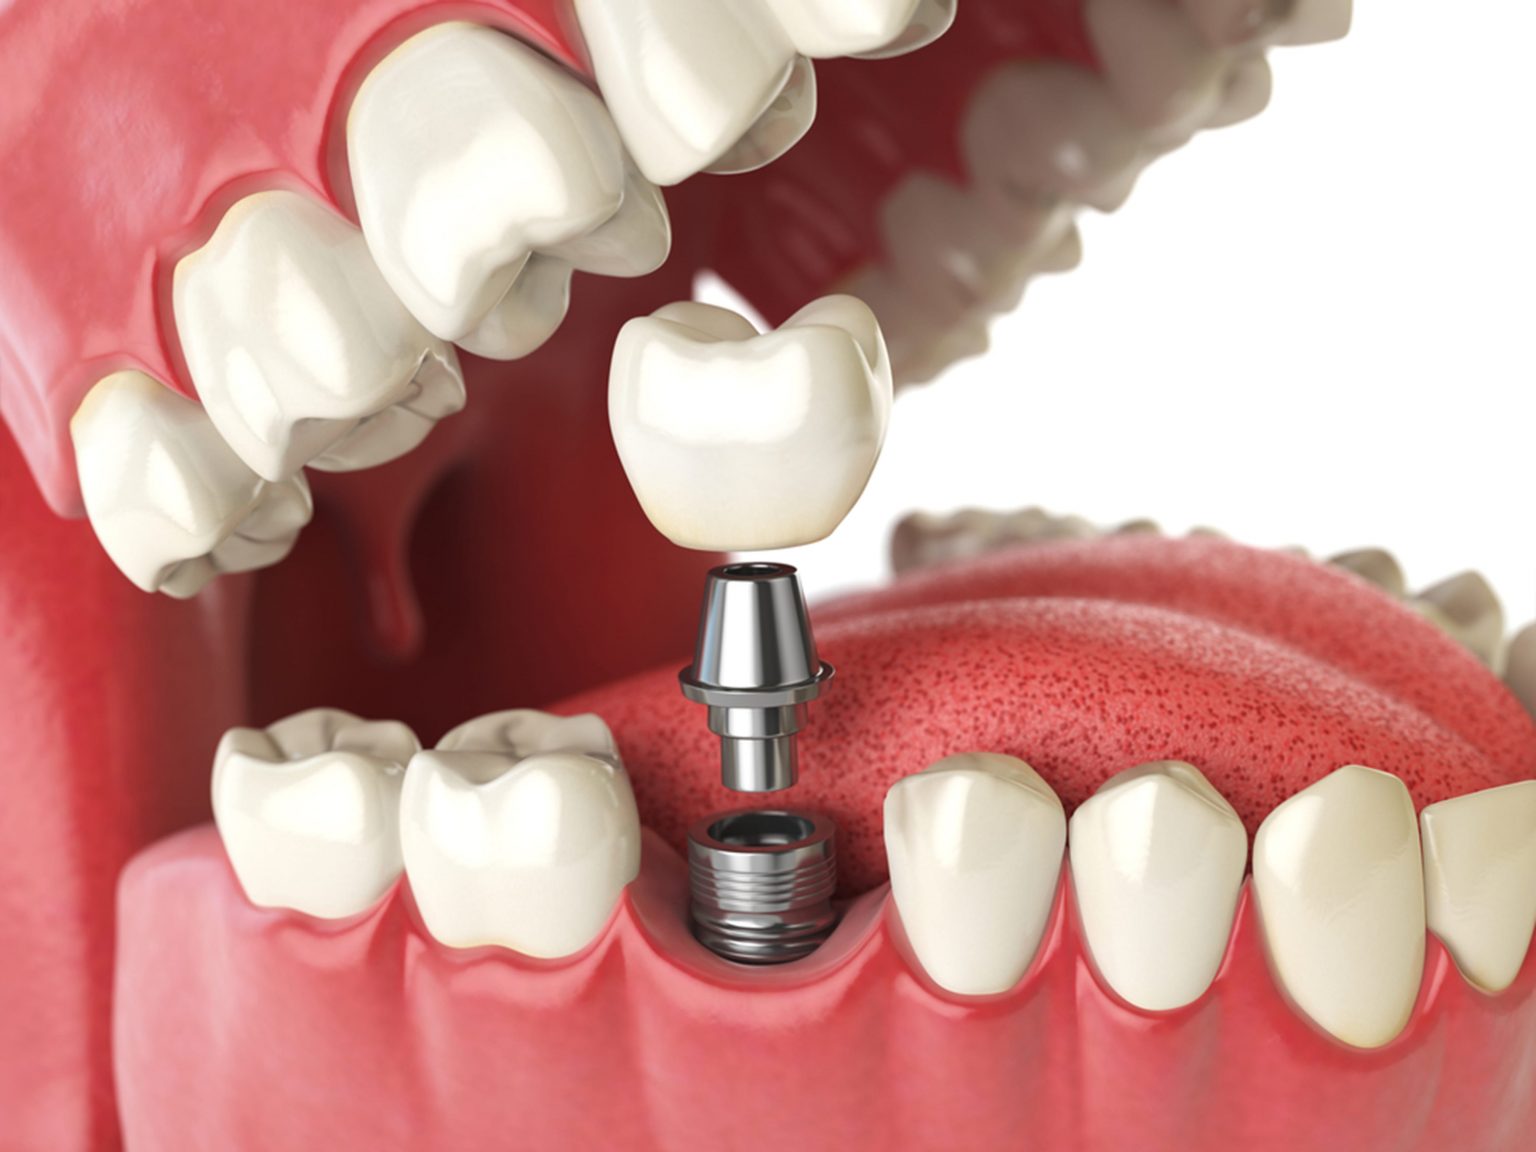 4 Types of Dental Implants (Which One Is Best for You?) - Sunridge